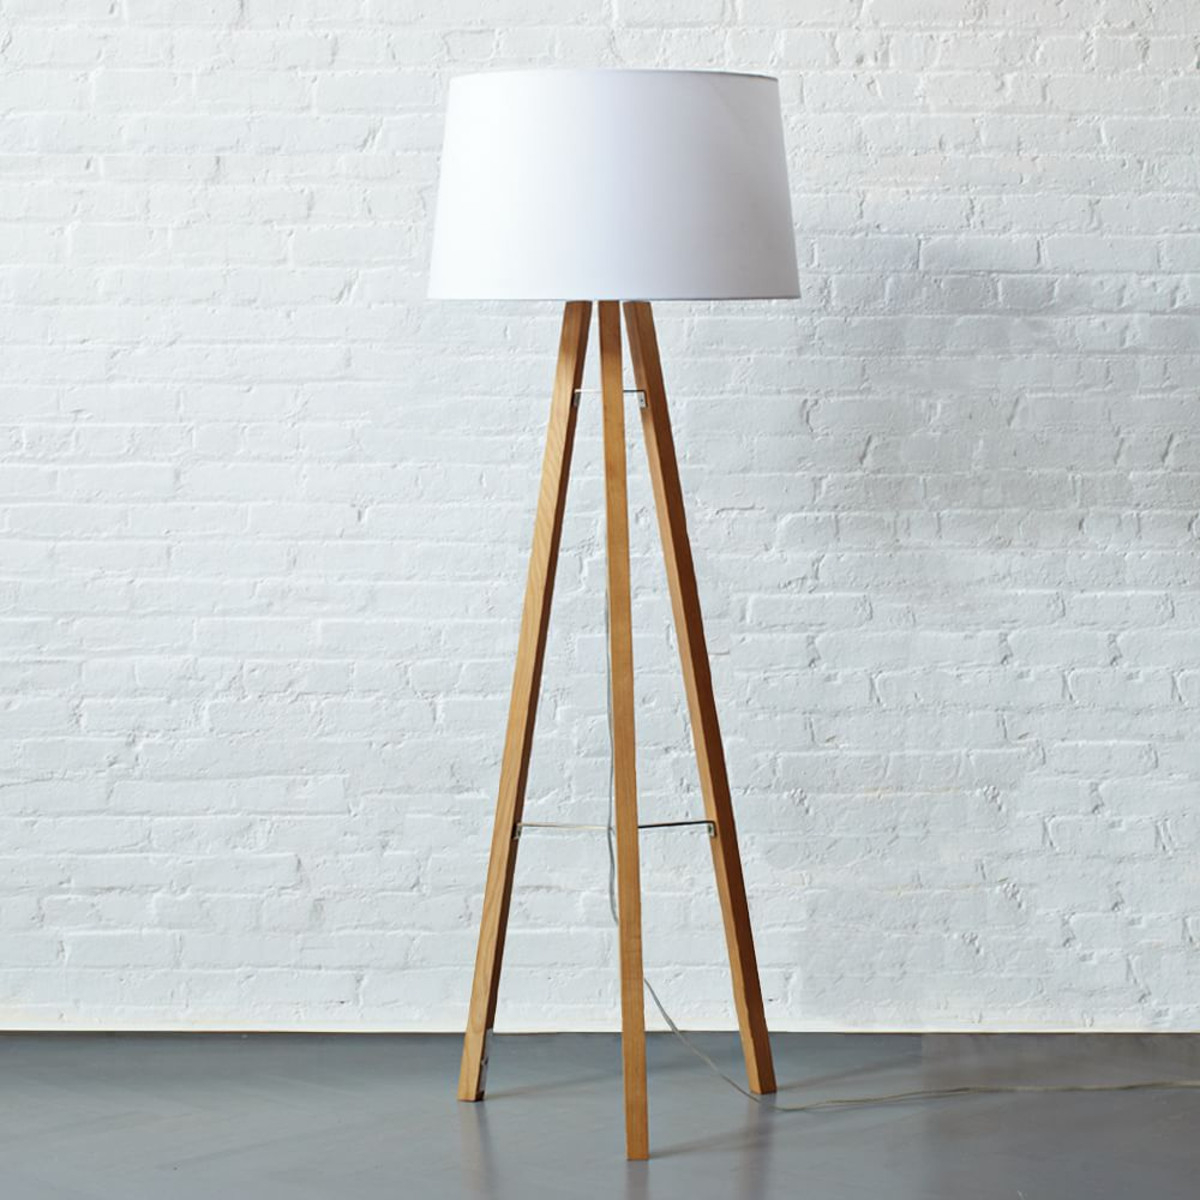 Stylish Wood Floor Lamp Light Best Great Jonno Promotion intended for proportions 1200 X 1200